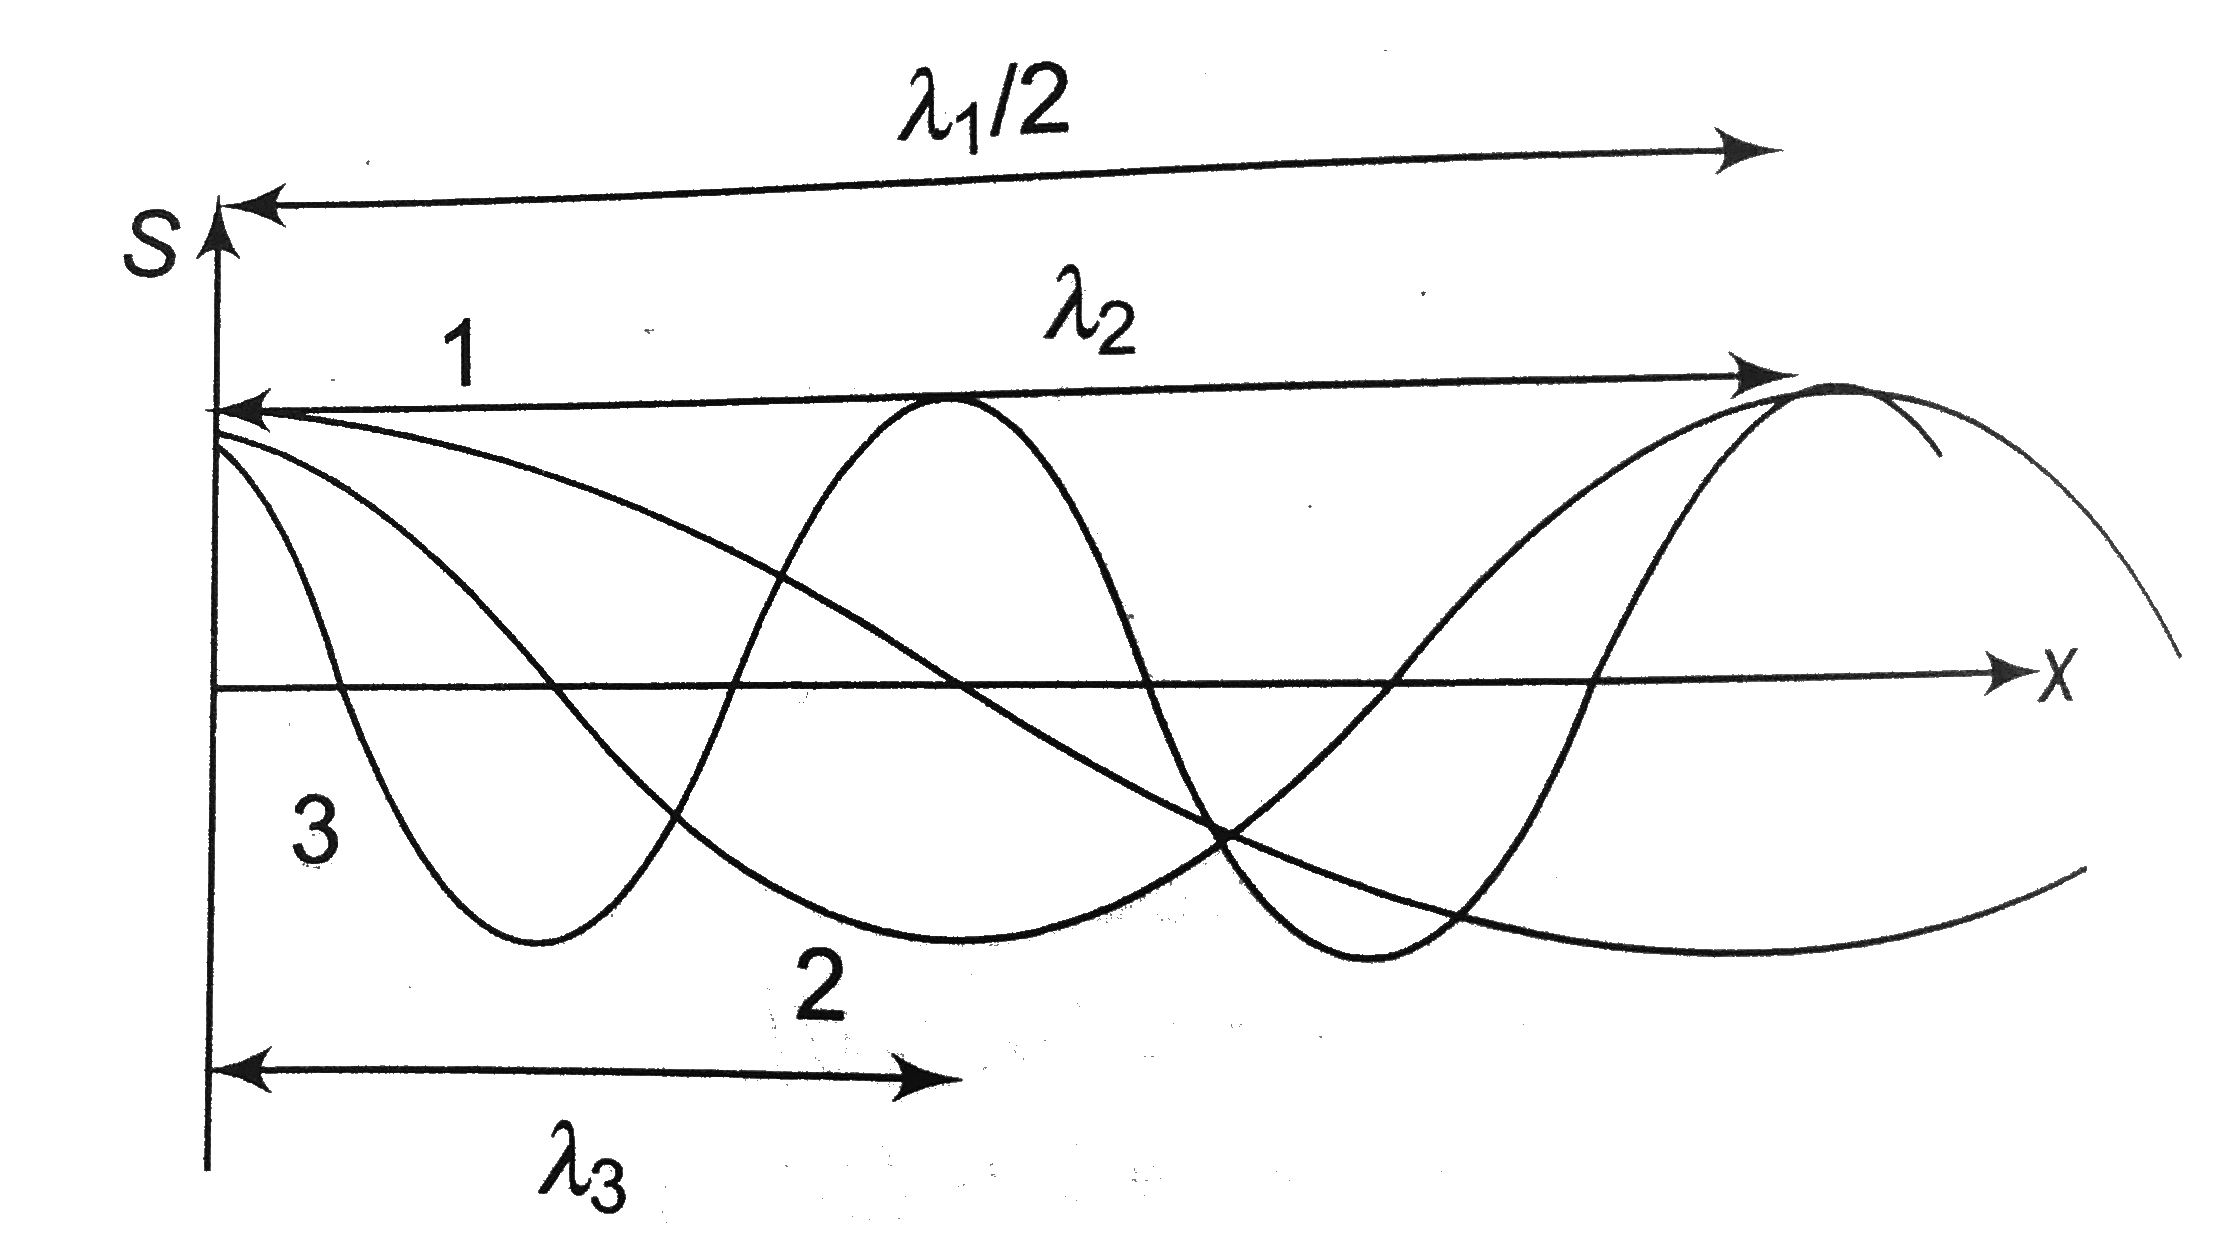 Figure shown is a graph at a certain time t, of the displacement function S(x,t) of three sound waves 1,2 and 3 as marked on the curves that travel along x-axis through air. If P1,P2 and P3 represent their pressure amplitudes respectively then contact relation between them is: